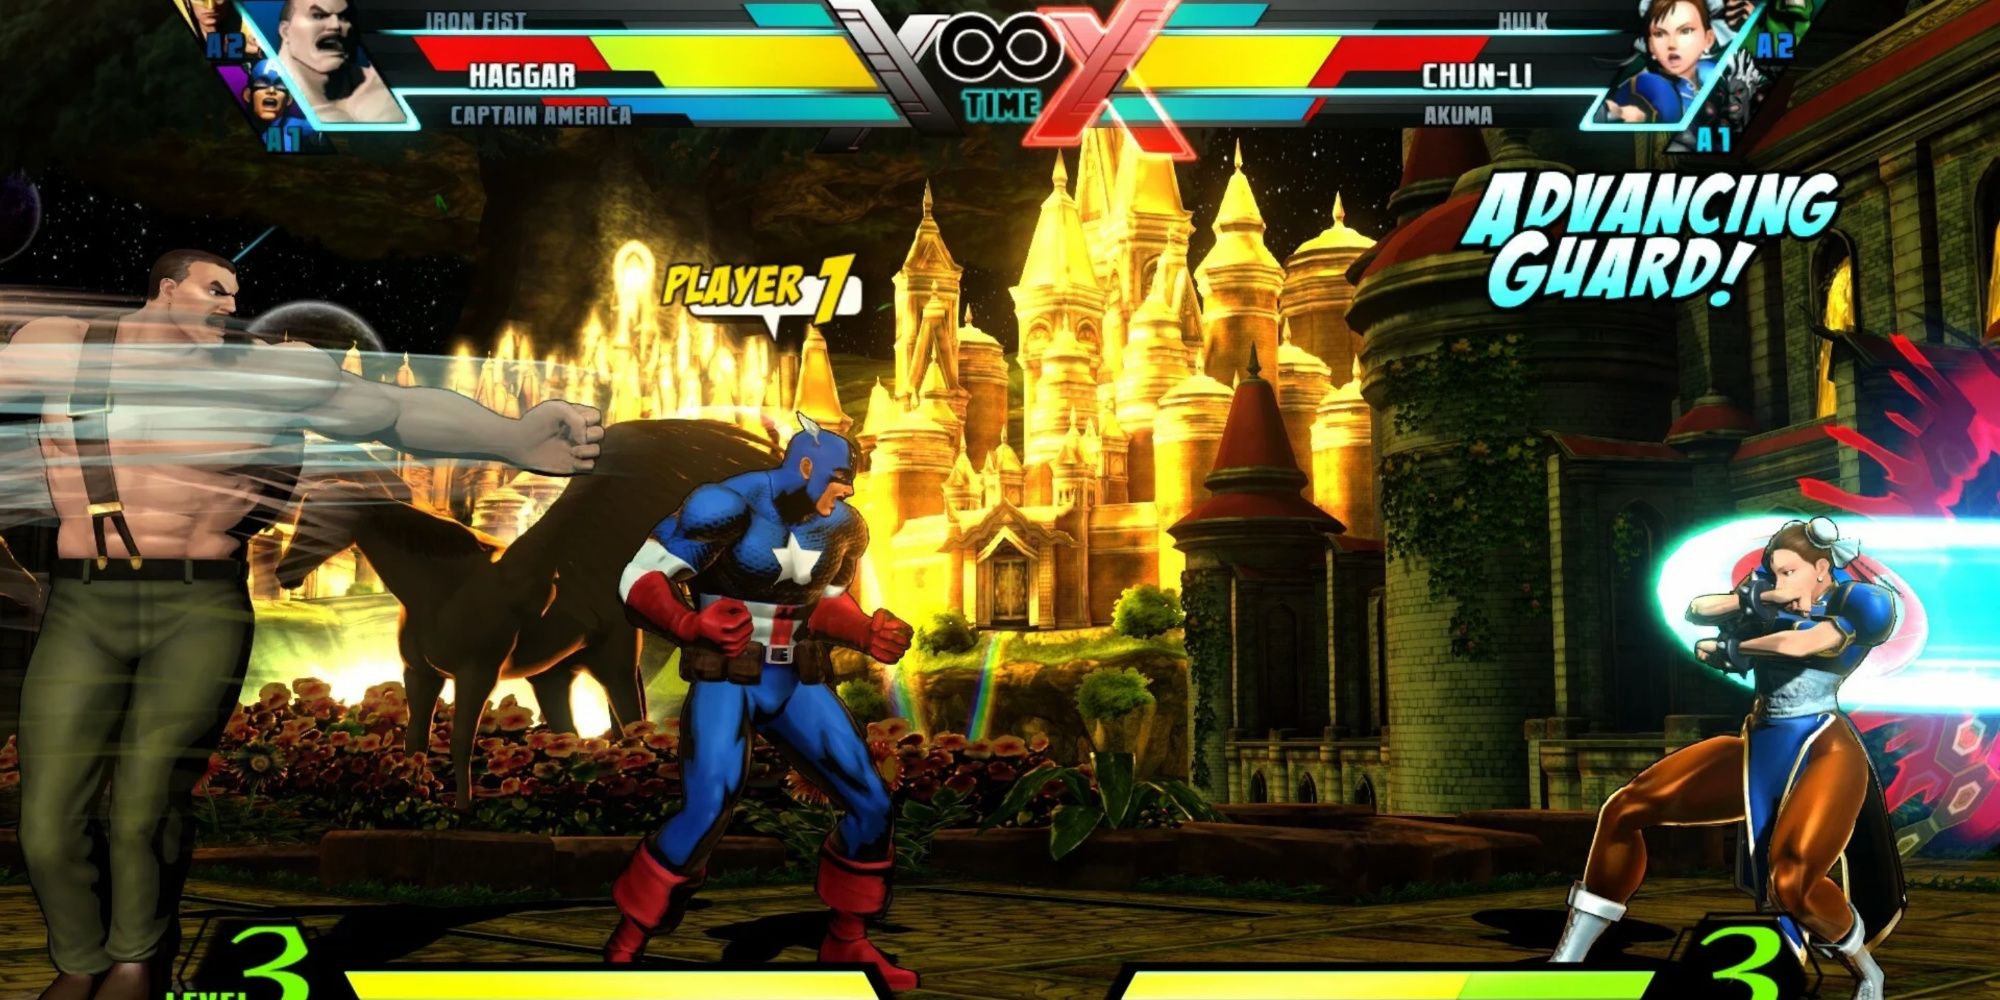 Playing a match in Marvel vs Capcom 3